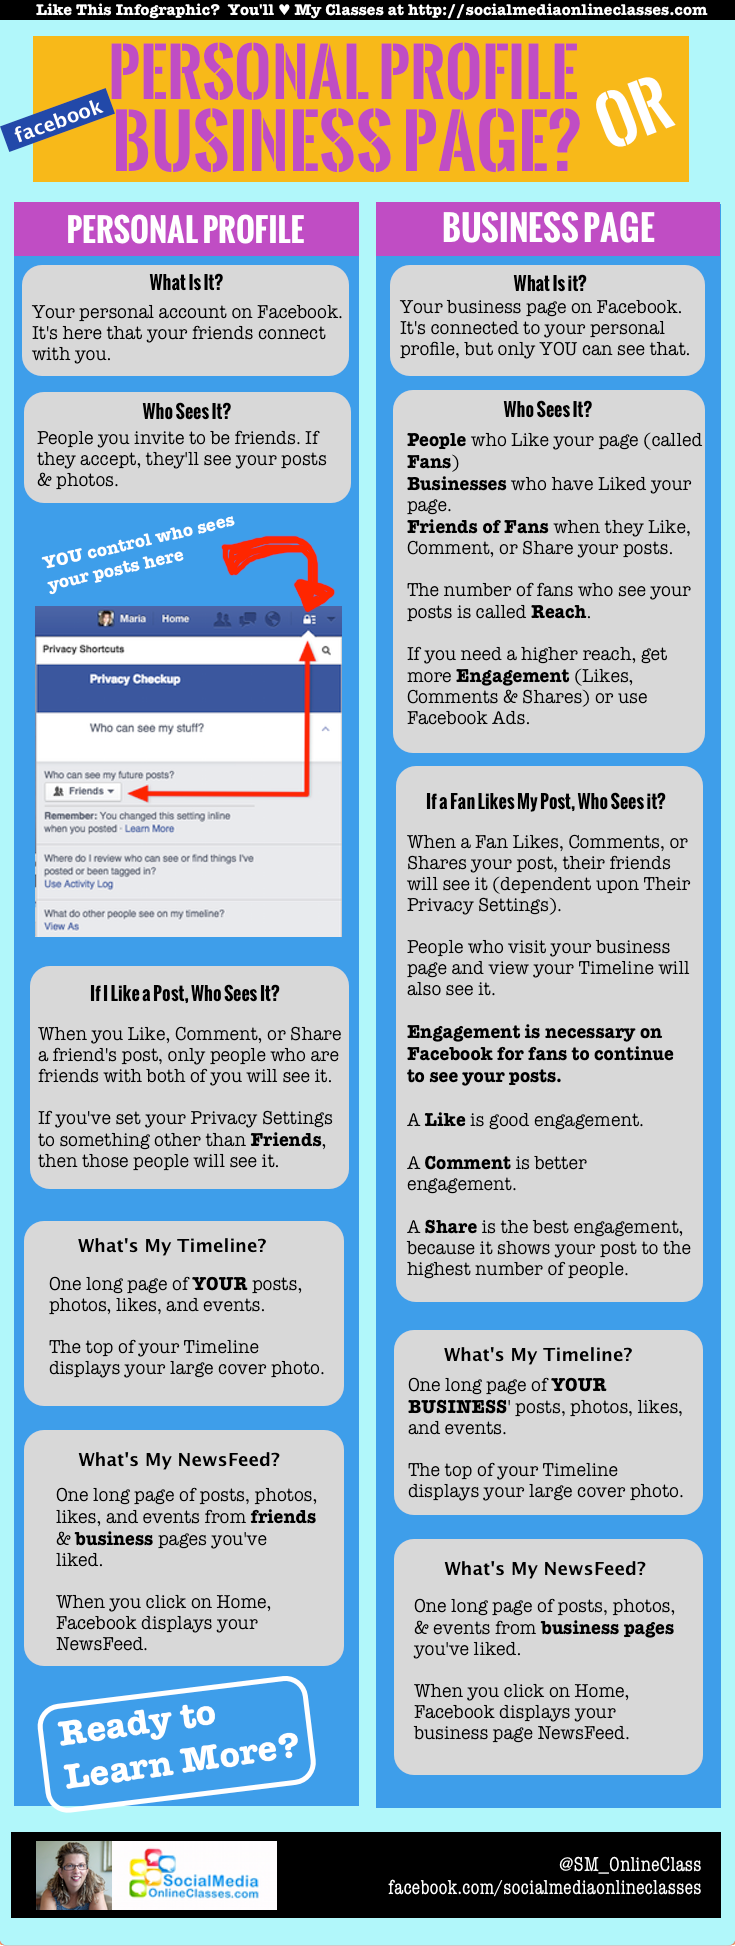 Facebook Profile vs Facebook Page: 10 Things You Need to Know